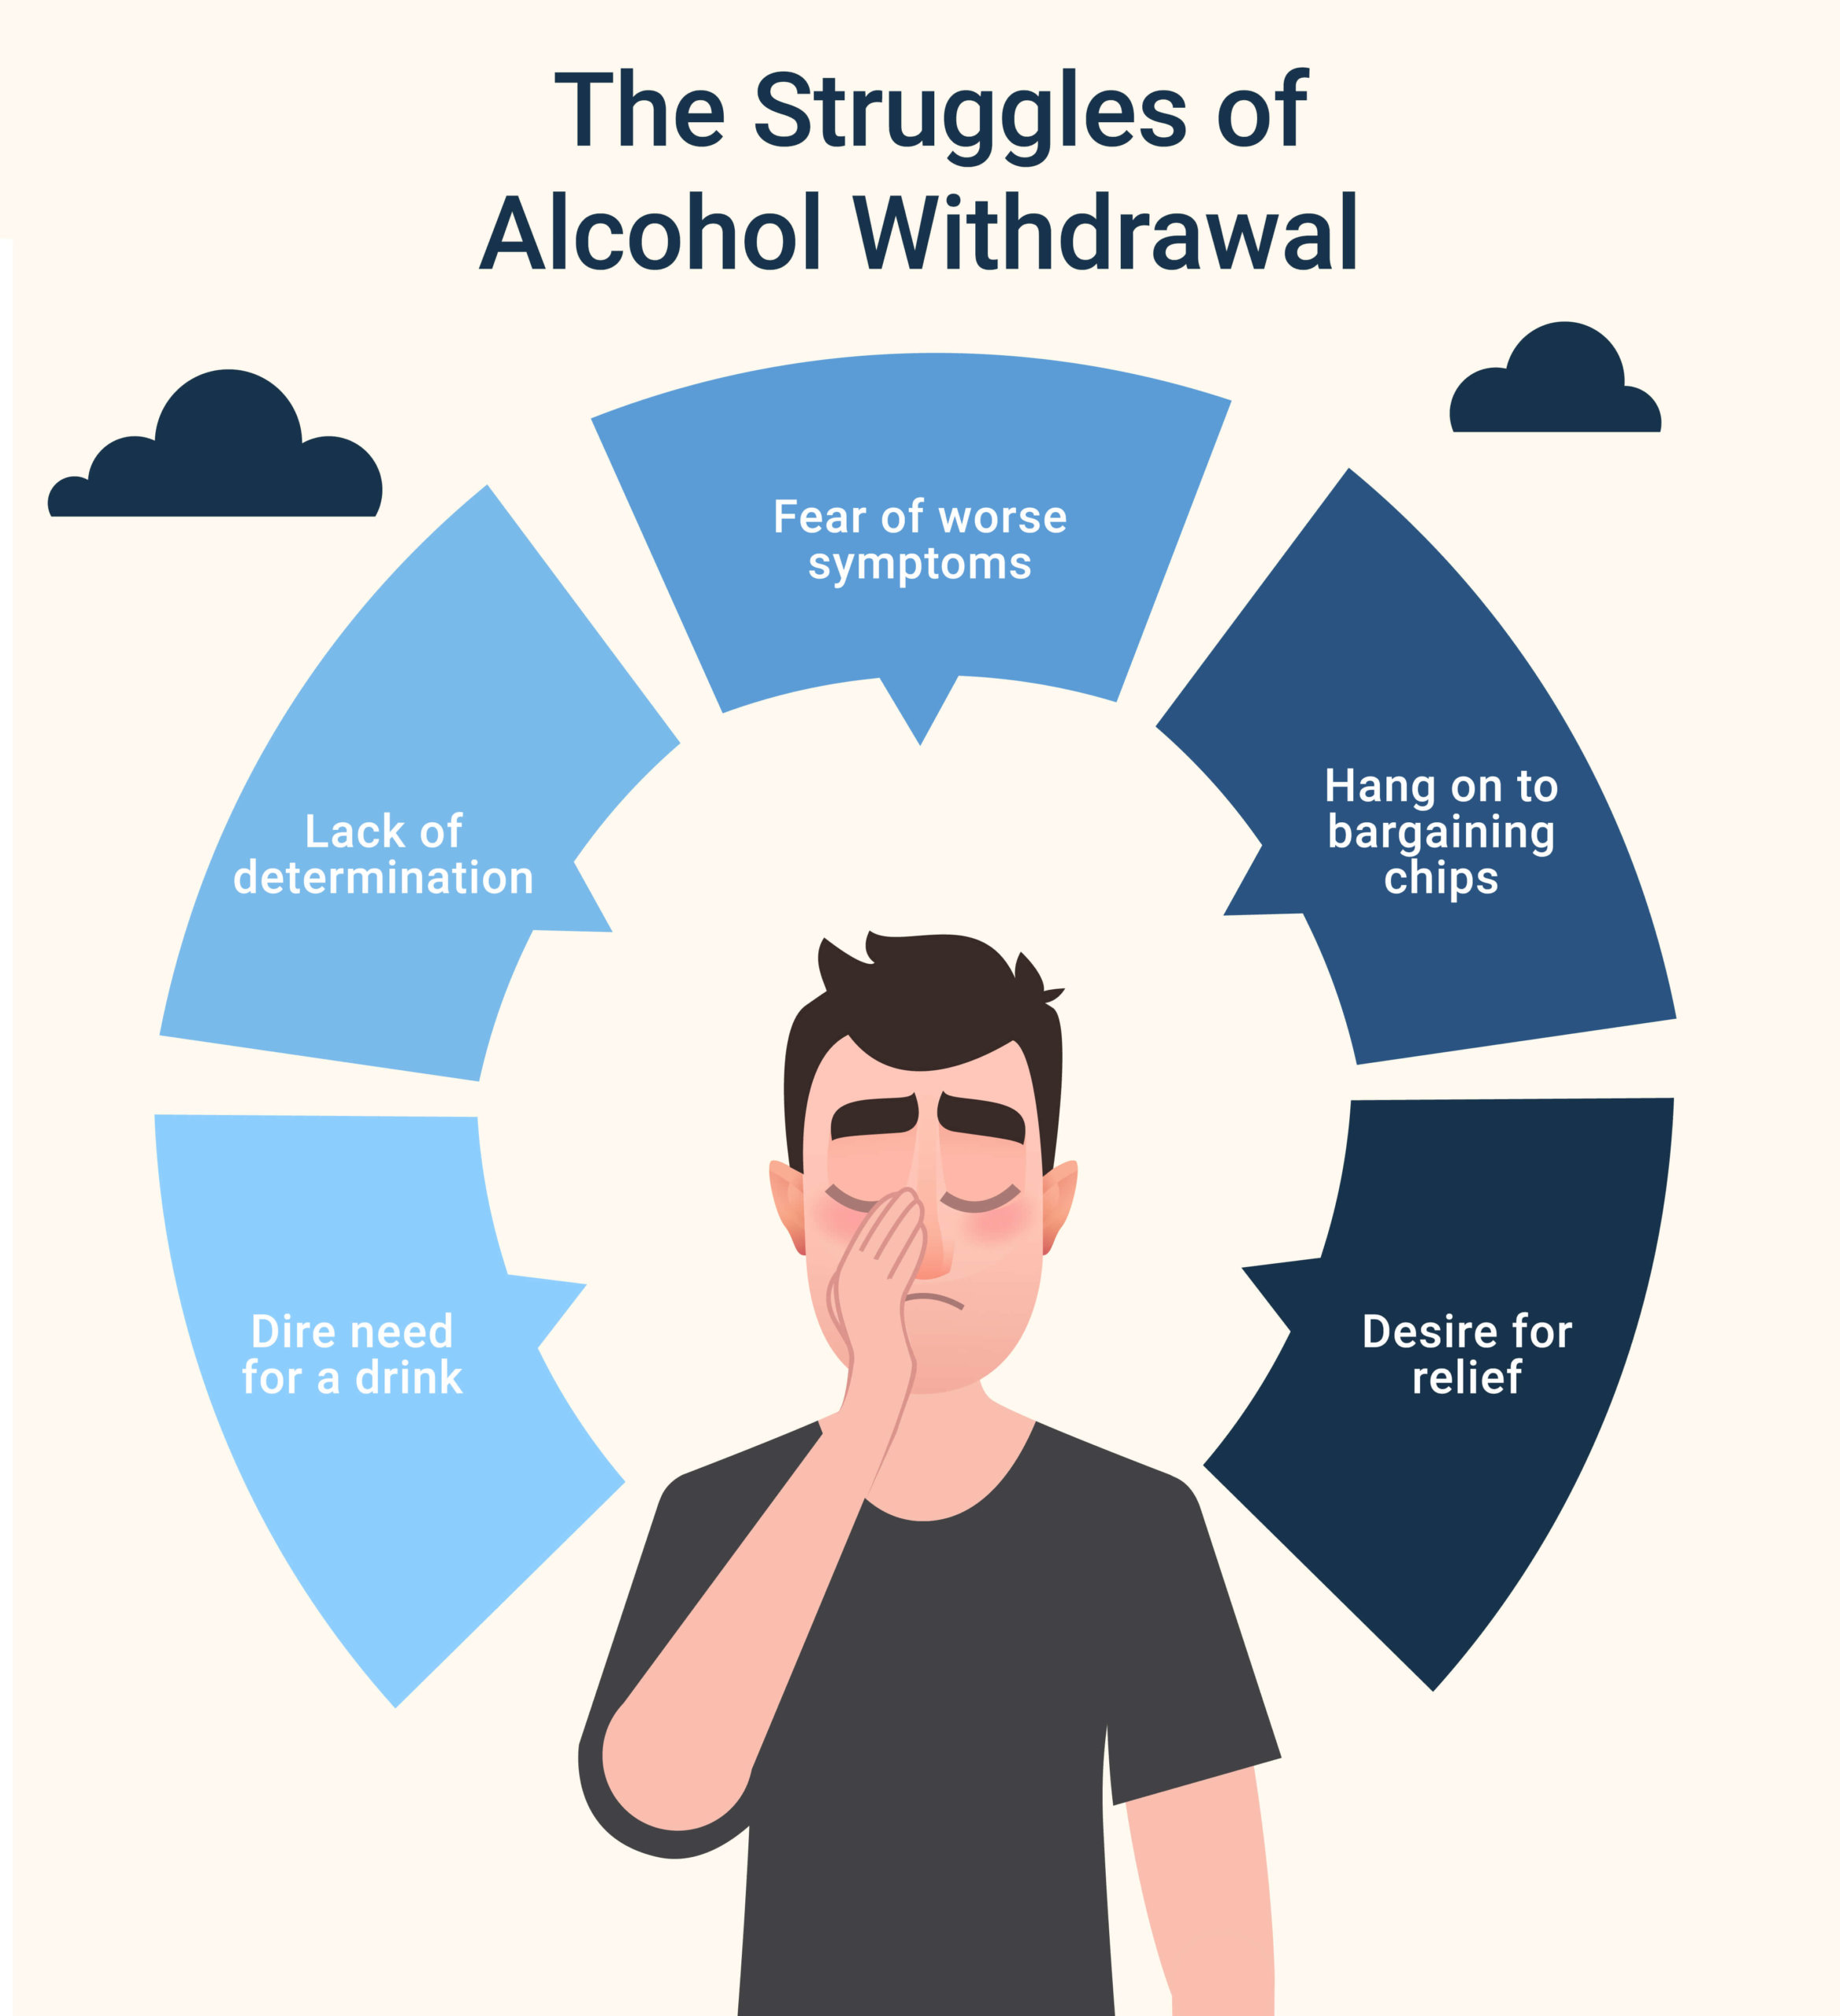 Stonegate Center Blog - You Shouldn't Detox from Alcohol at Home - Struggles of Alcohol Withdrawal